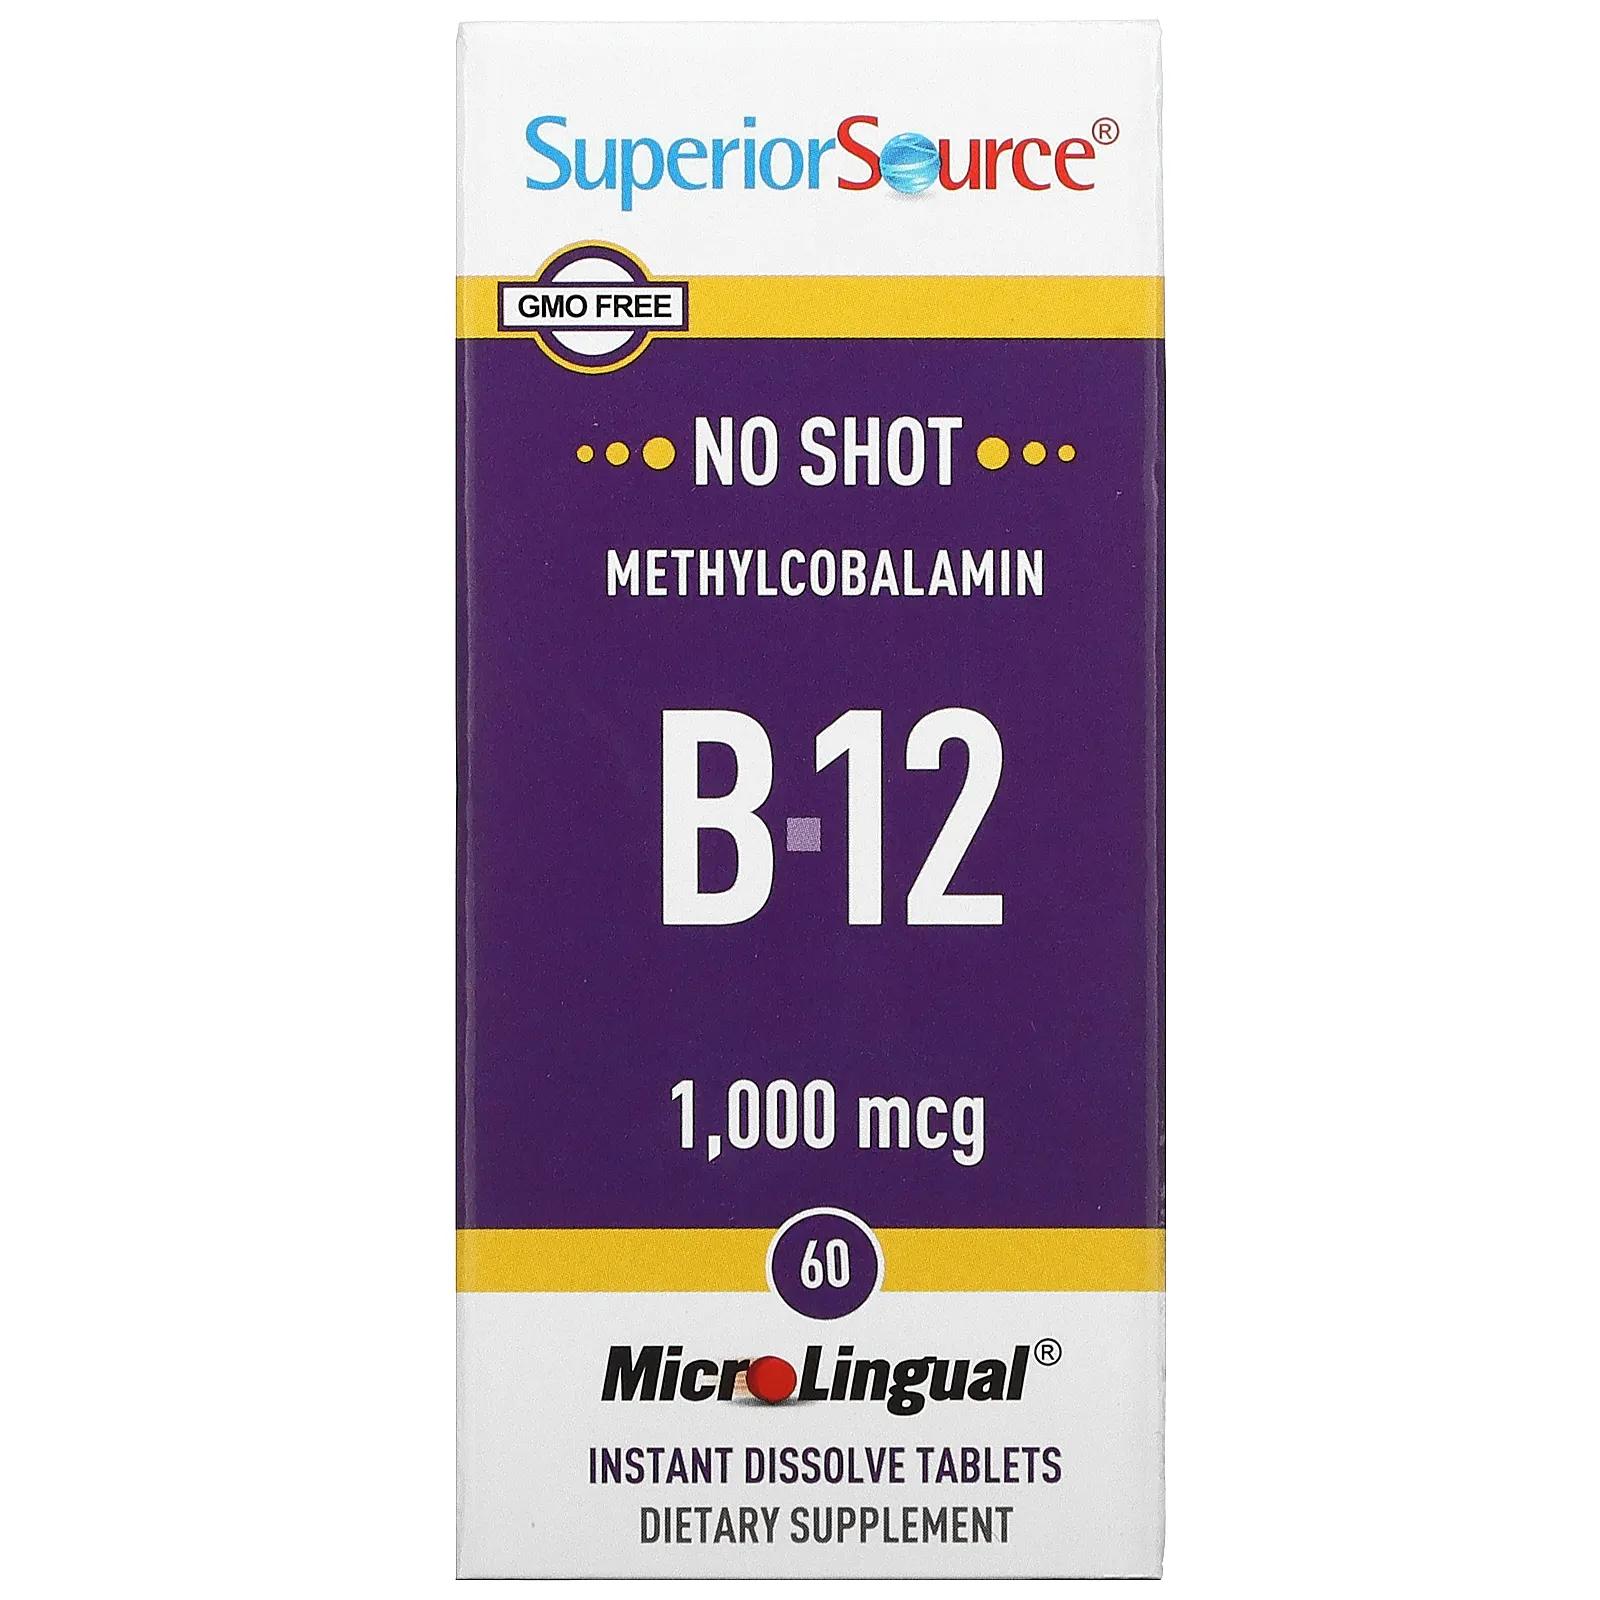 Superior Source Methylcobalamin B-12 1000 mcg 60 MicroLingual Instant Dissolve Tablets superior source pure nmn nicotinamide mononucleotide 125 mg 60 instant dissolve tablets